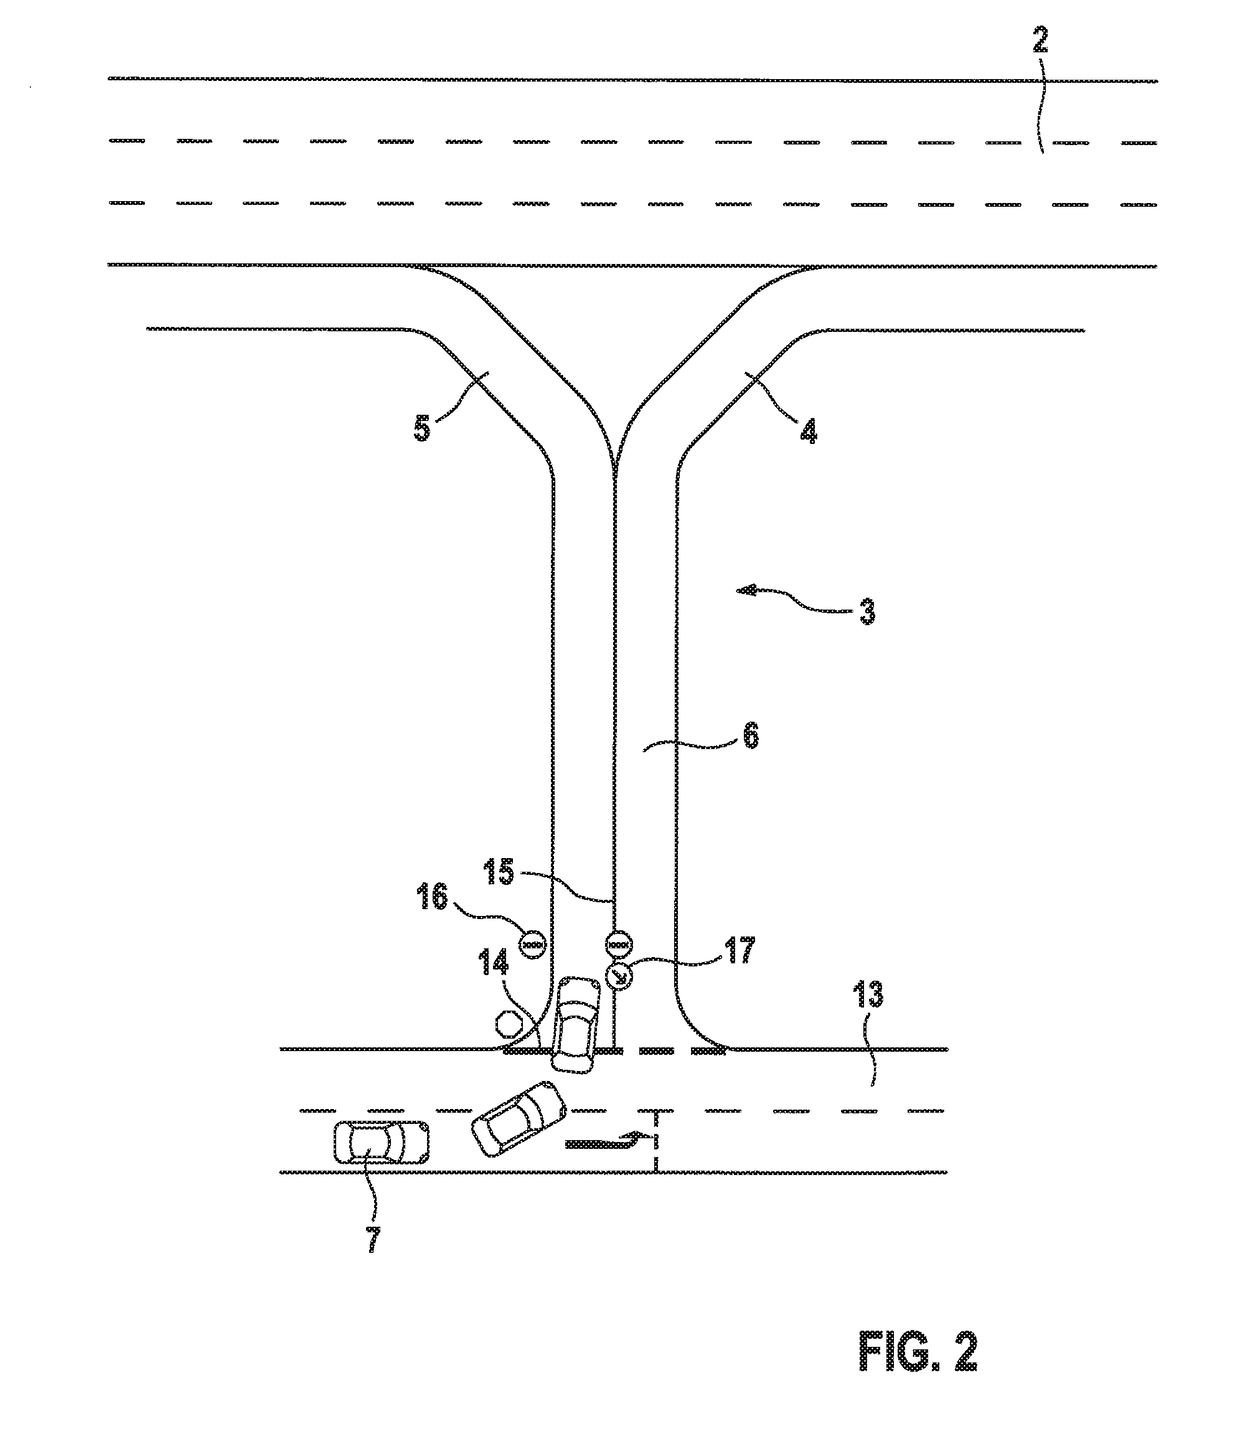 Method and control and detection unit for checking the plausibility of a wrong-way driving incident of a motor vehicle